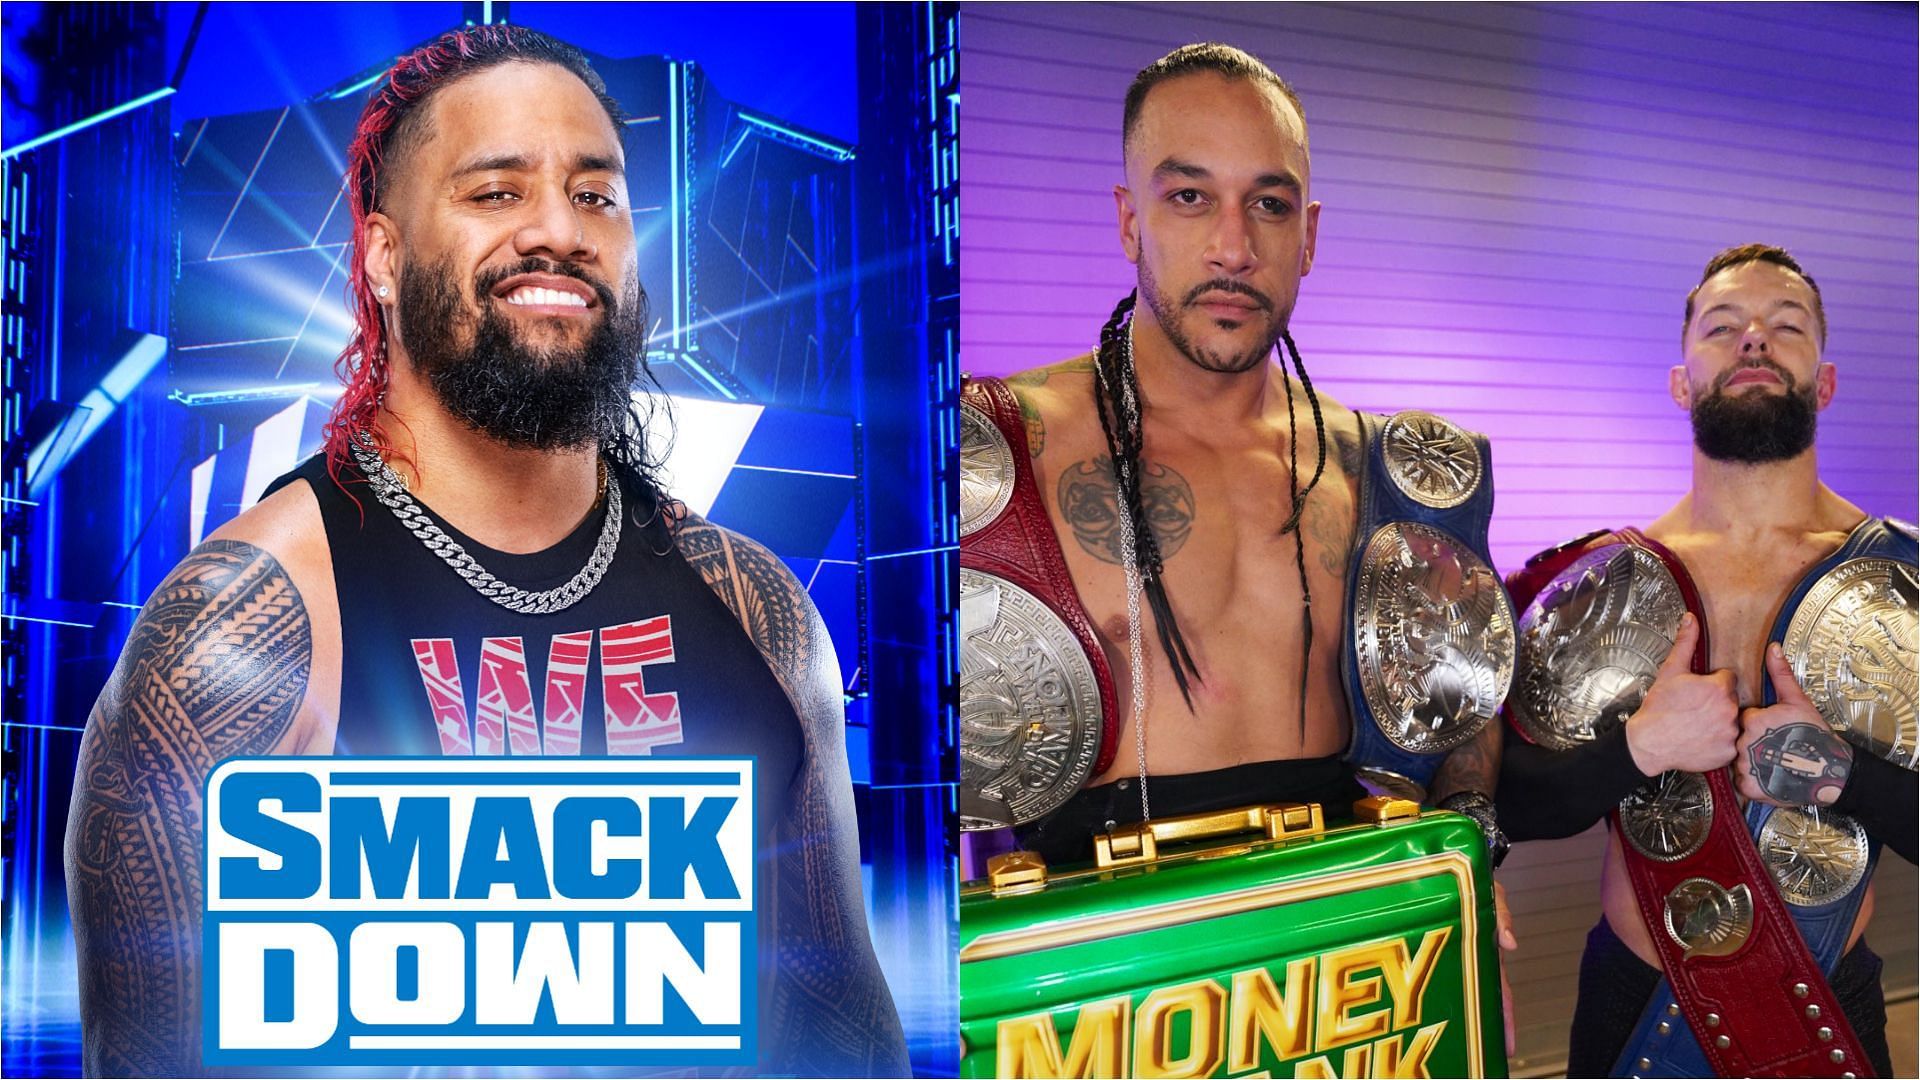 How will WWE SmackDown address the fallout from Payback 2023?